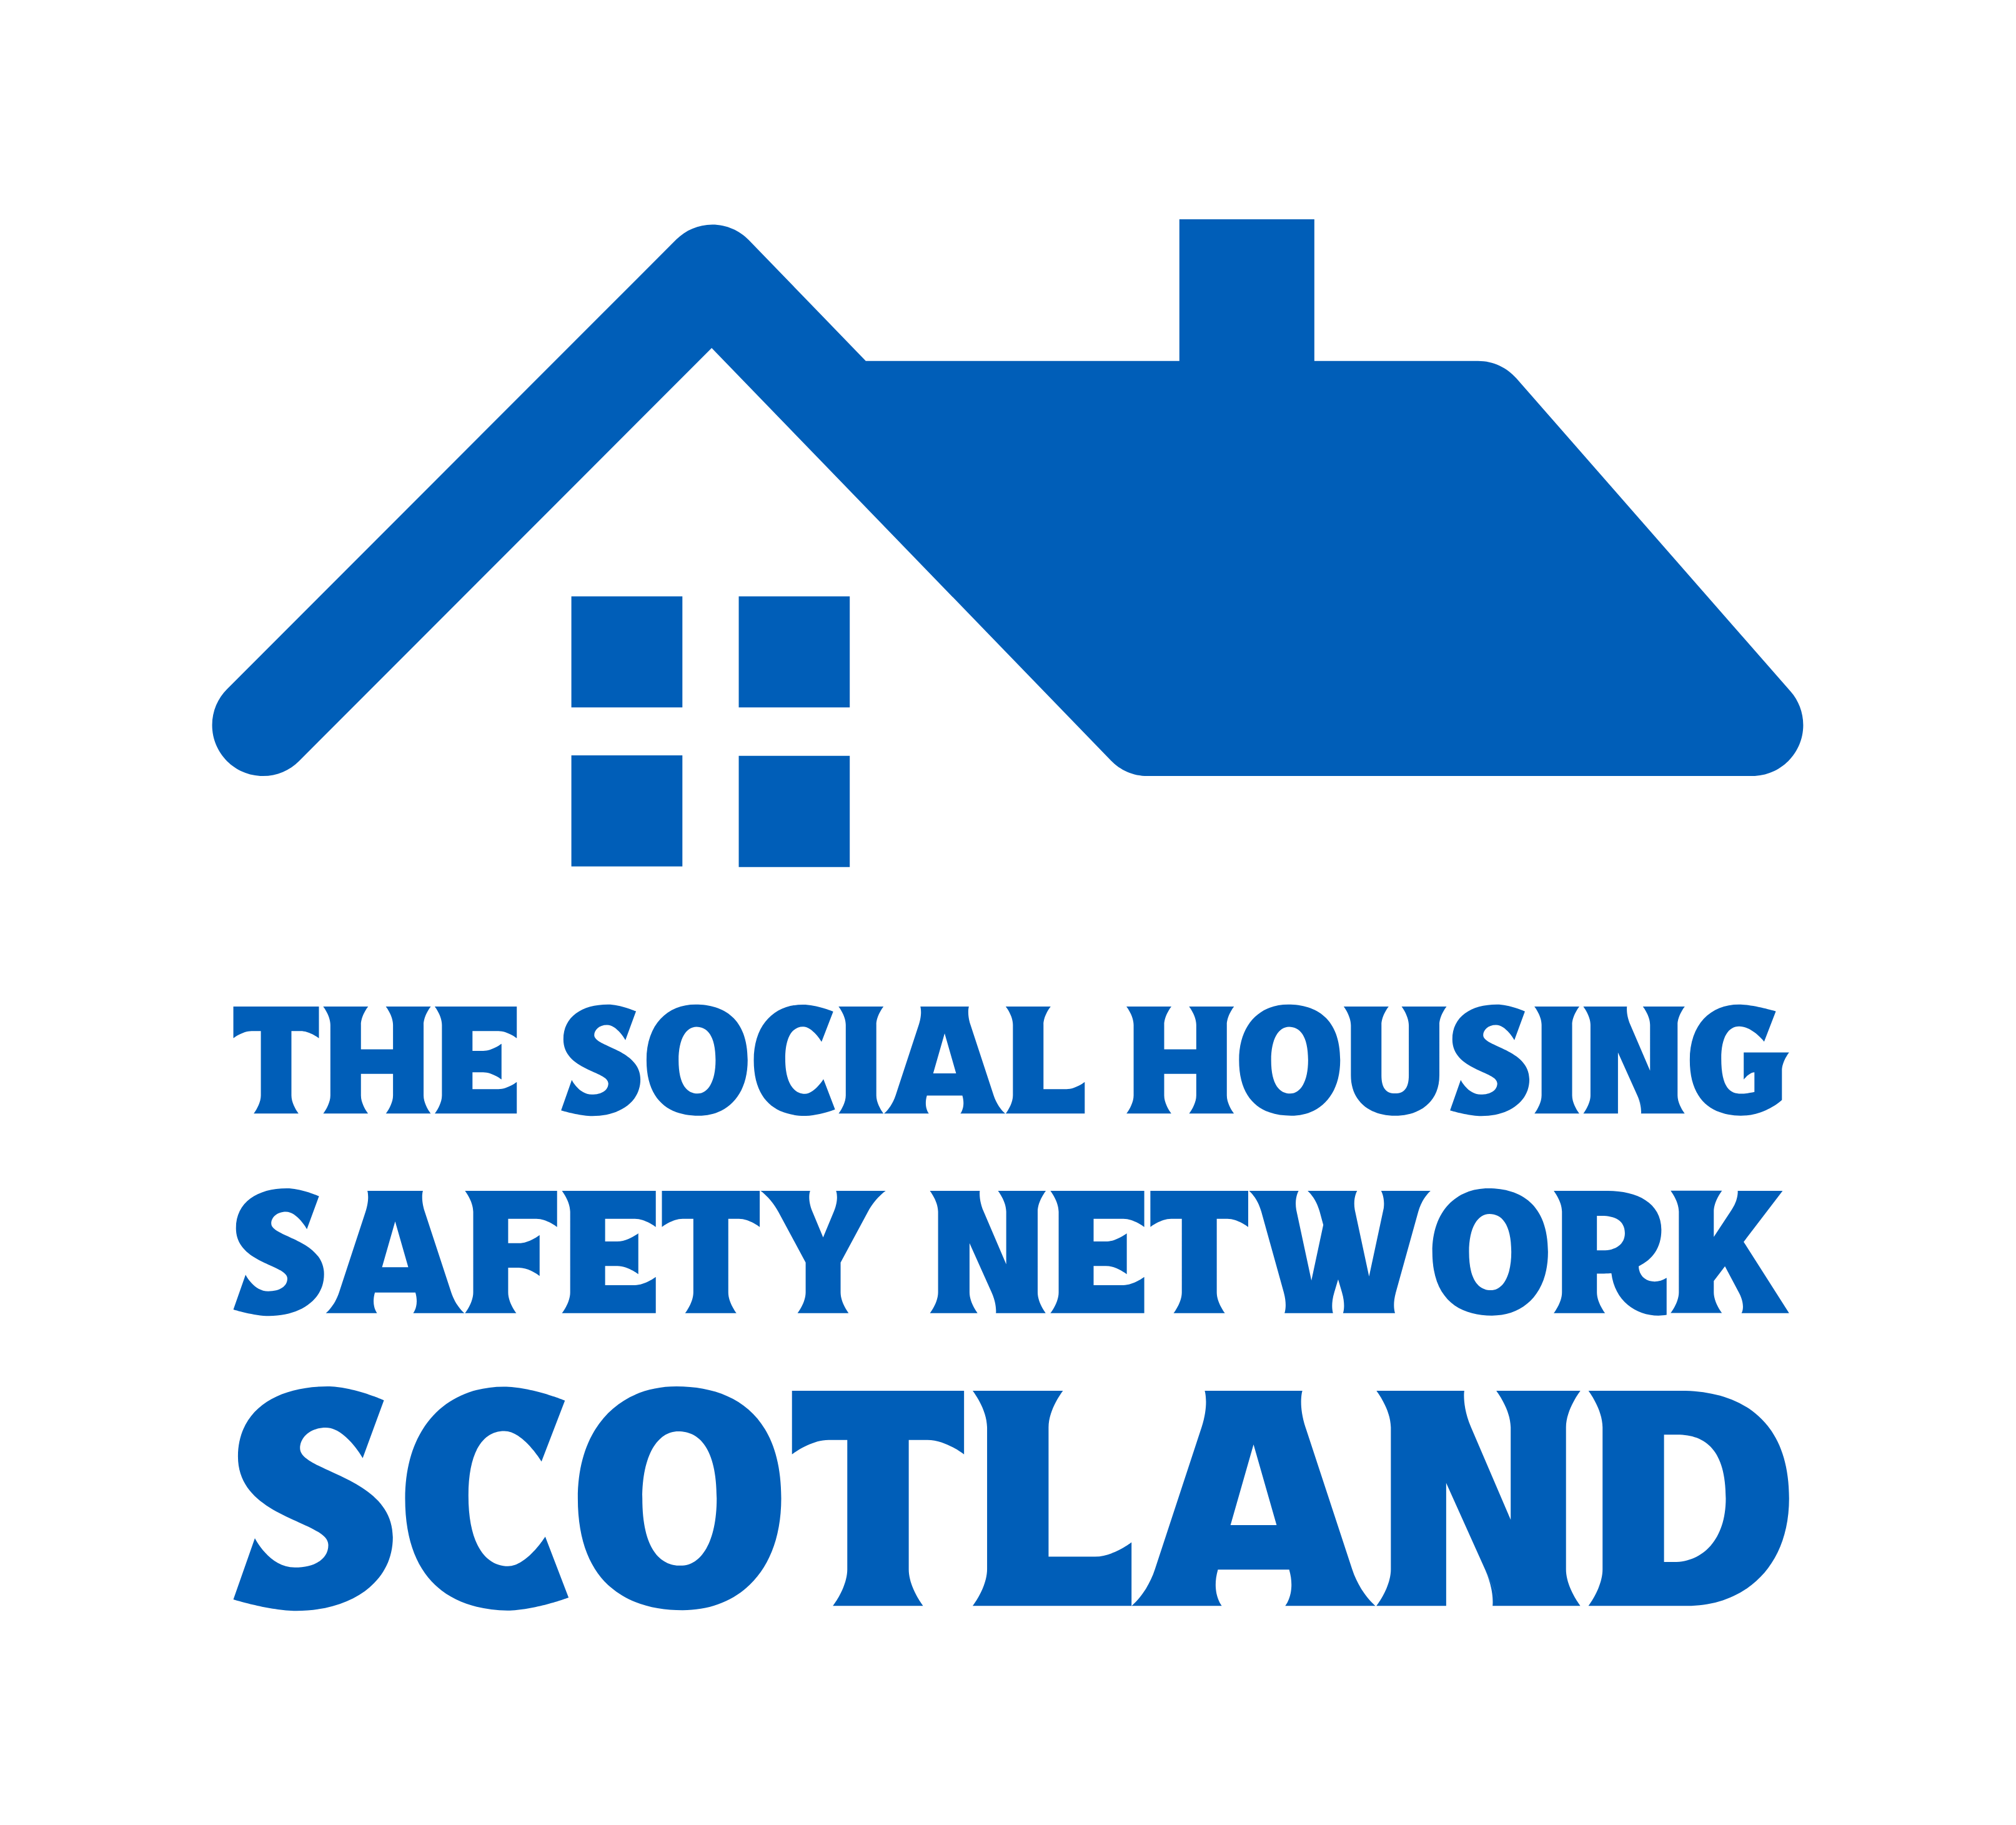 Introducing The Social Housing Safety Network Scotland